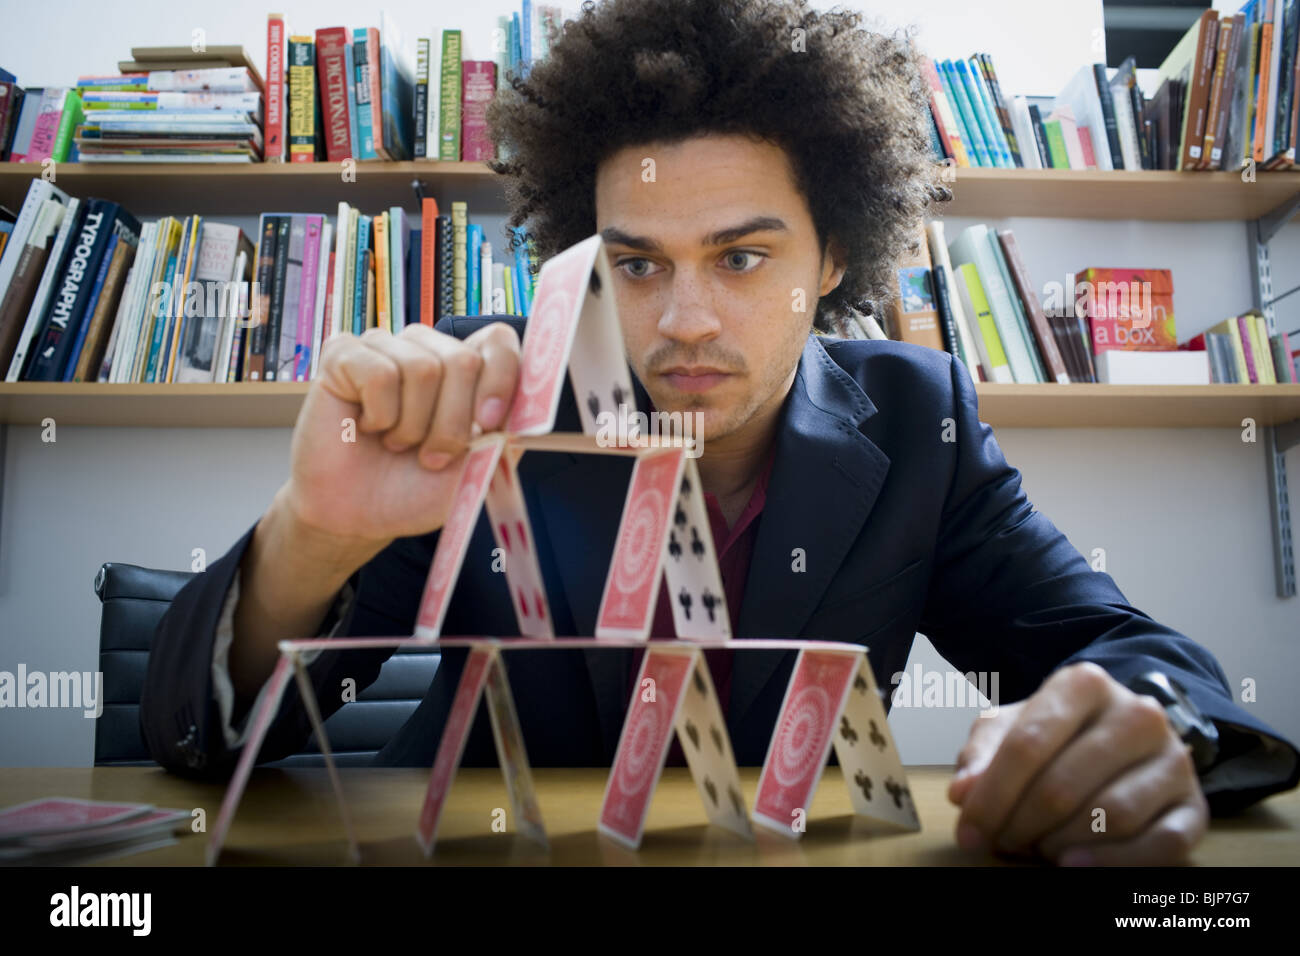 Man making a pyramid out of playing cards Stock Photo